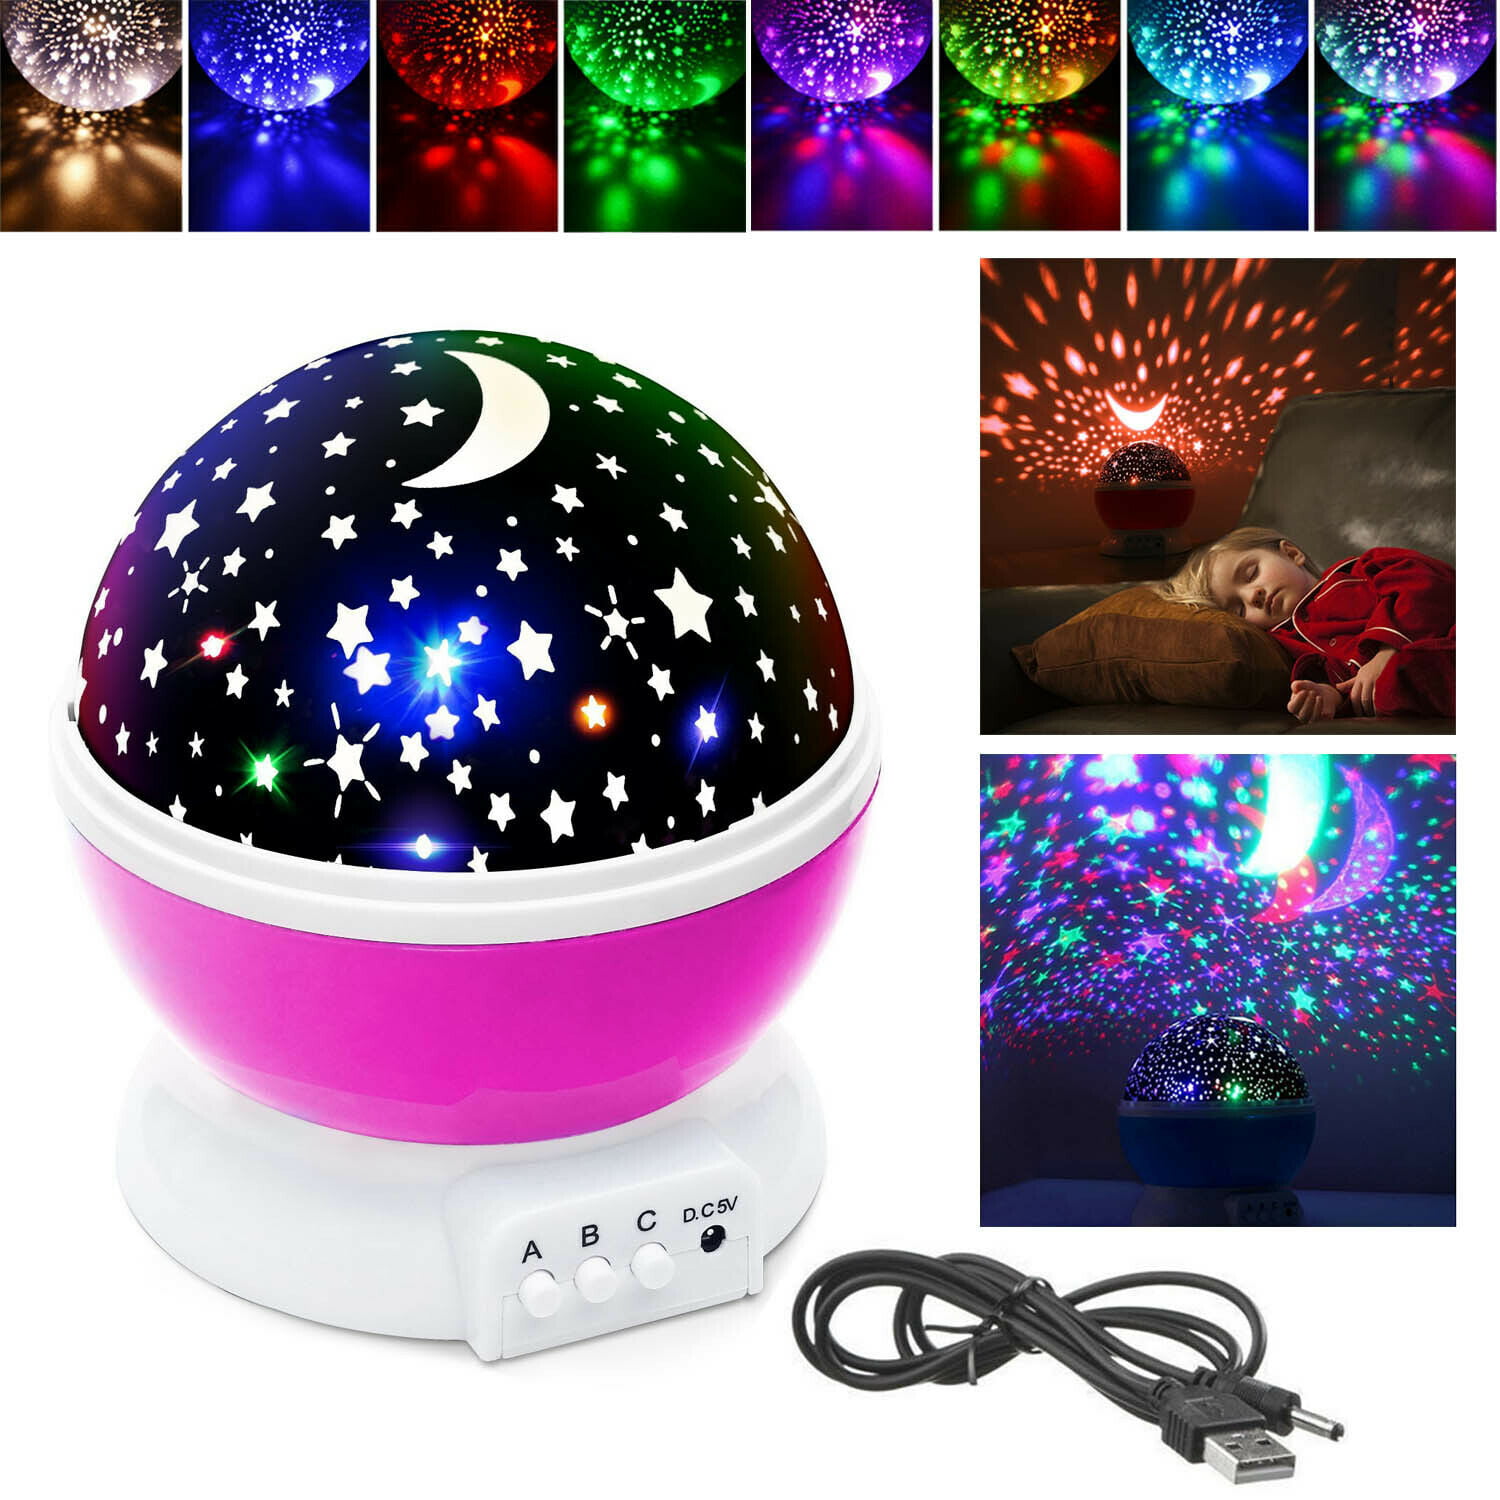 Star Master Projector Light/night light/LEDs Colour Changing Christmas/Halloween 